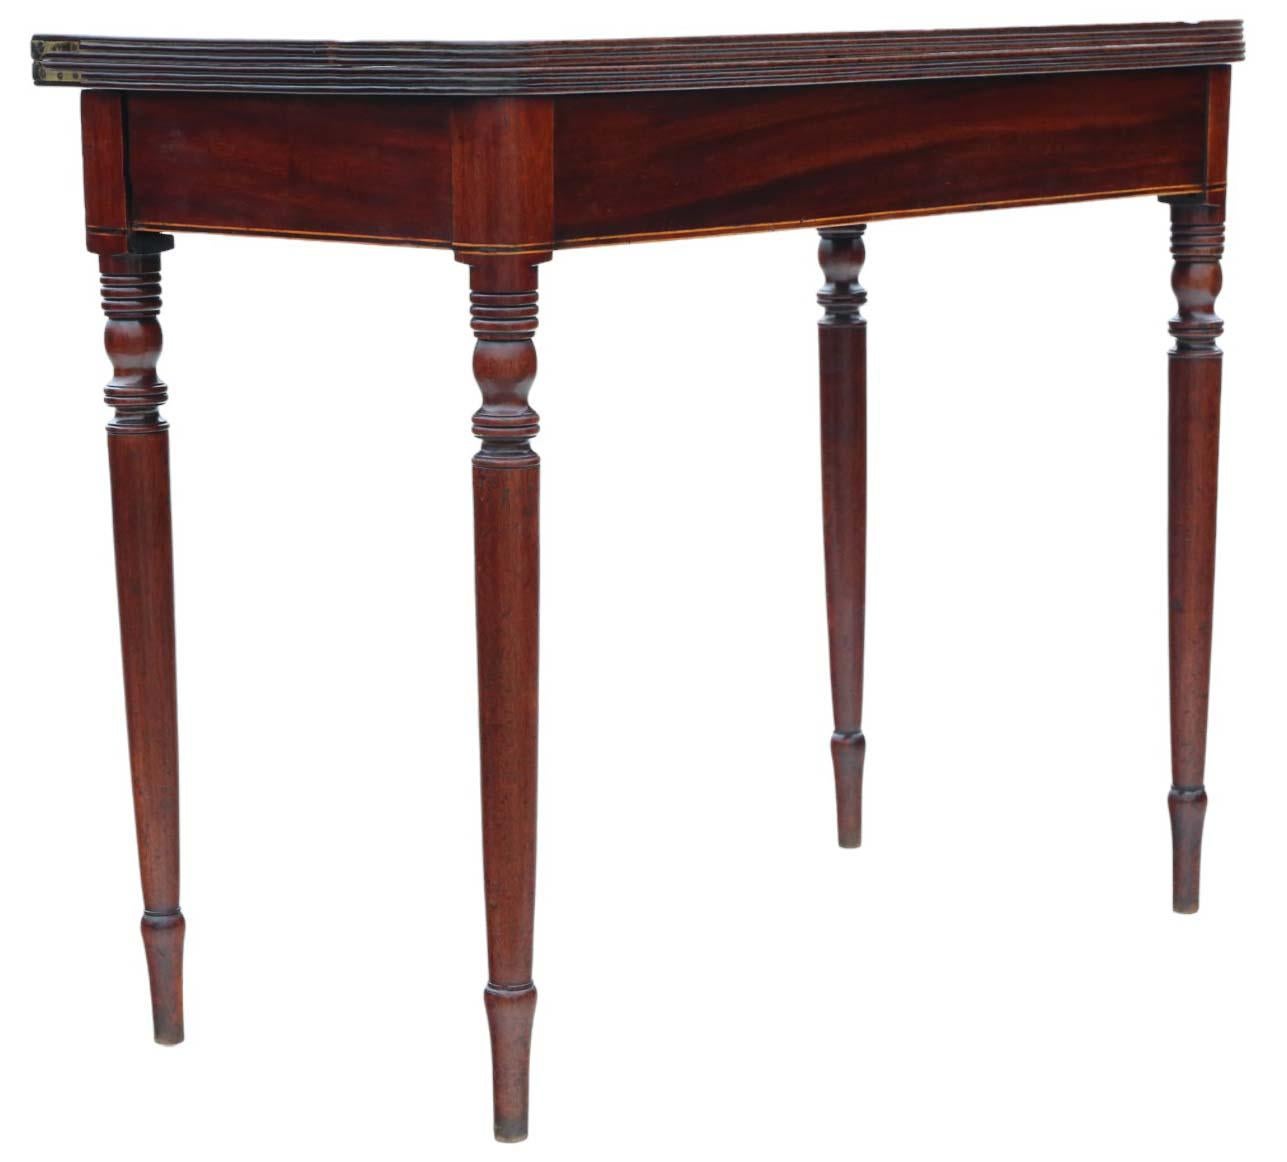 Early 19th Century Antique Fine Quality C1800 Inlaid Mahogany Folding Card or Tea Table - Side For Sale